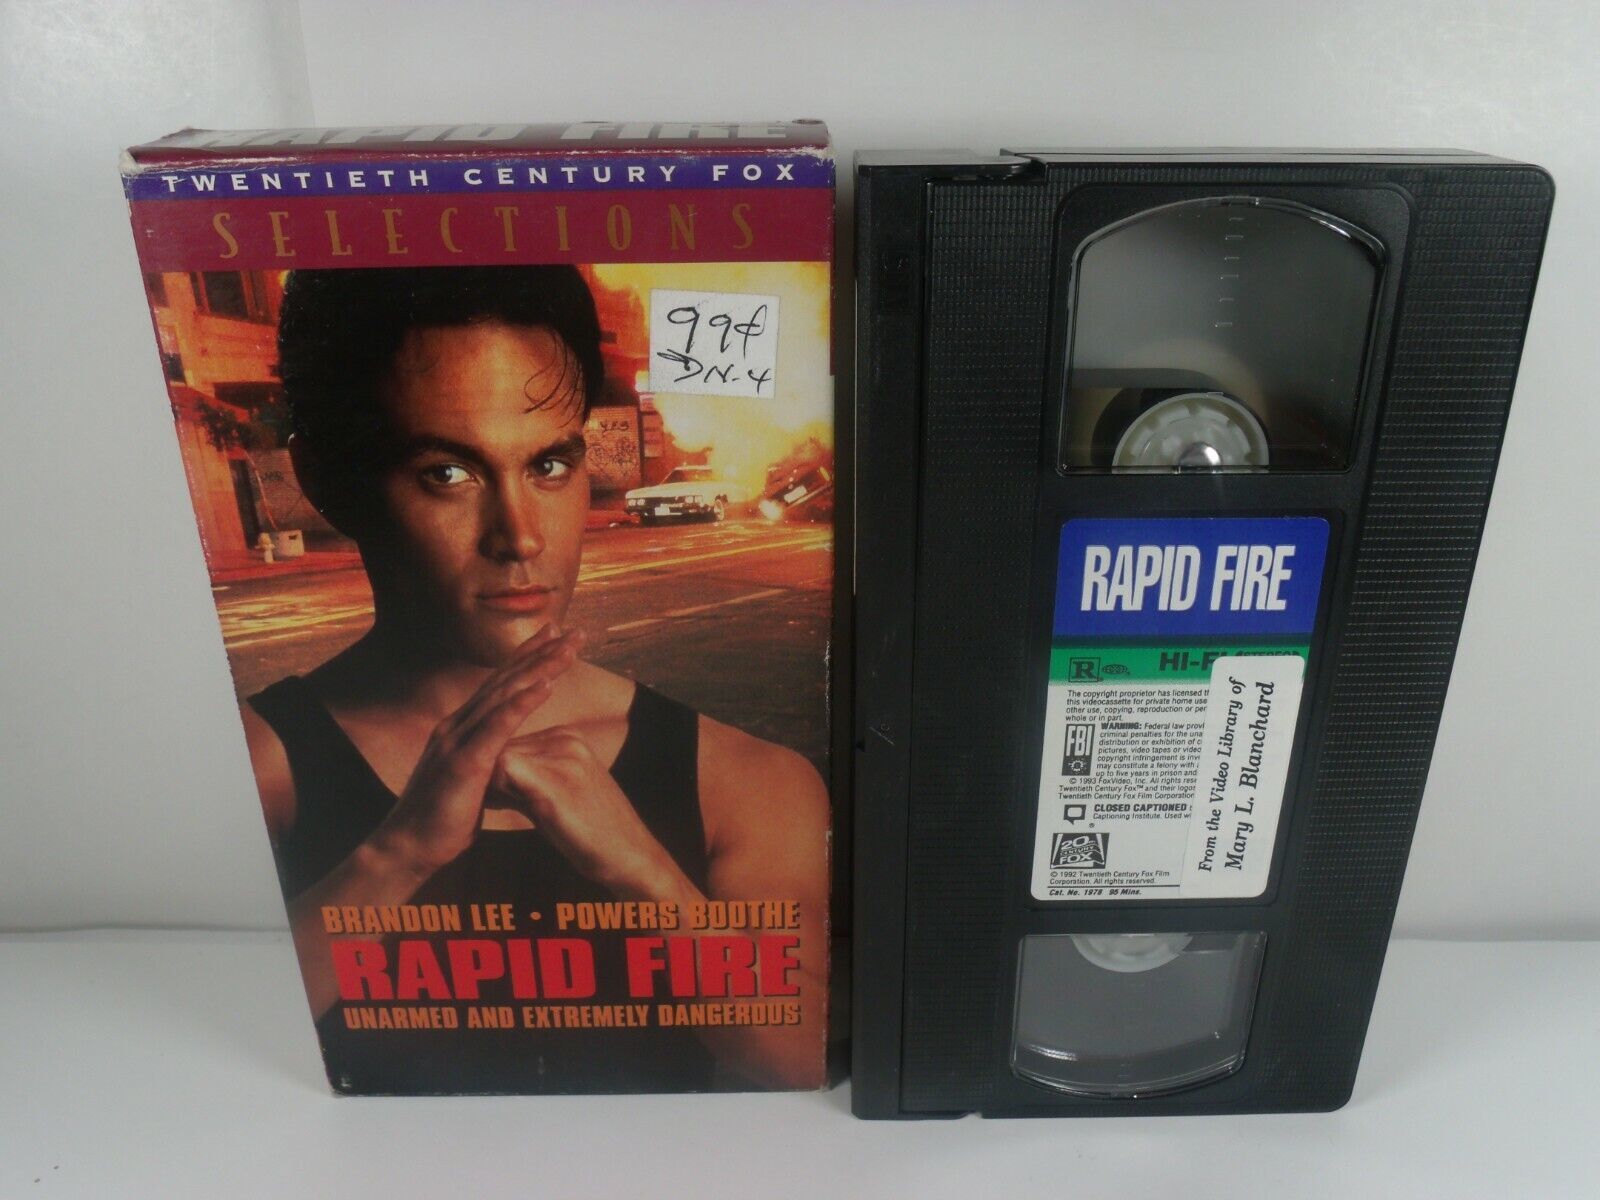 Rapid Fire (VHS, 1992) Brandon Lee, Powers Boothe - VHS Tapes